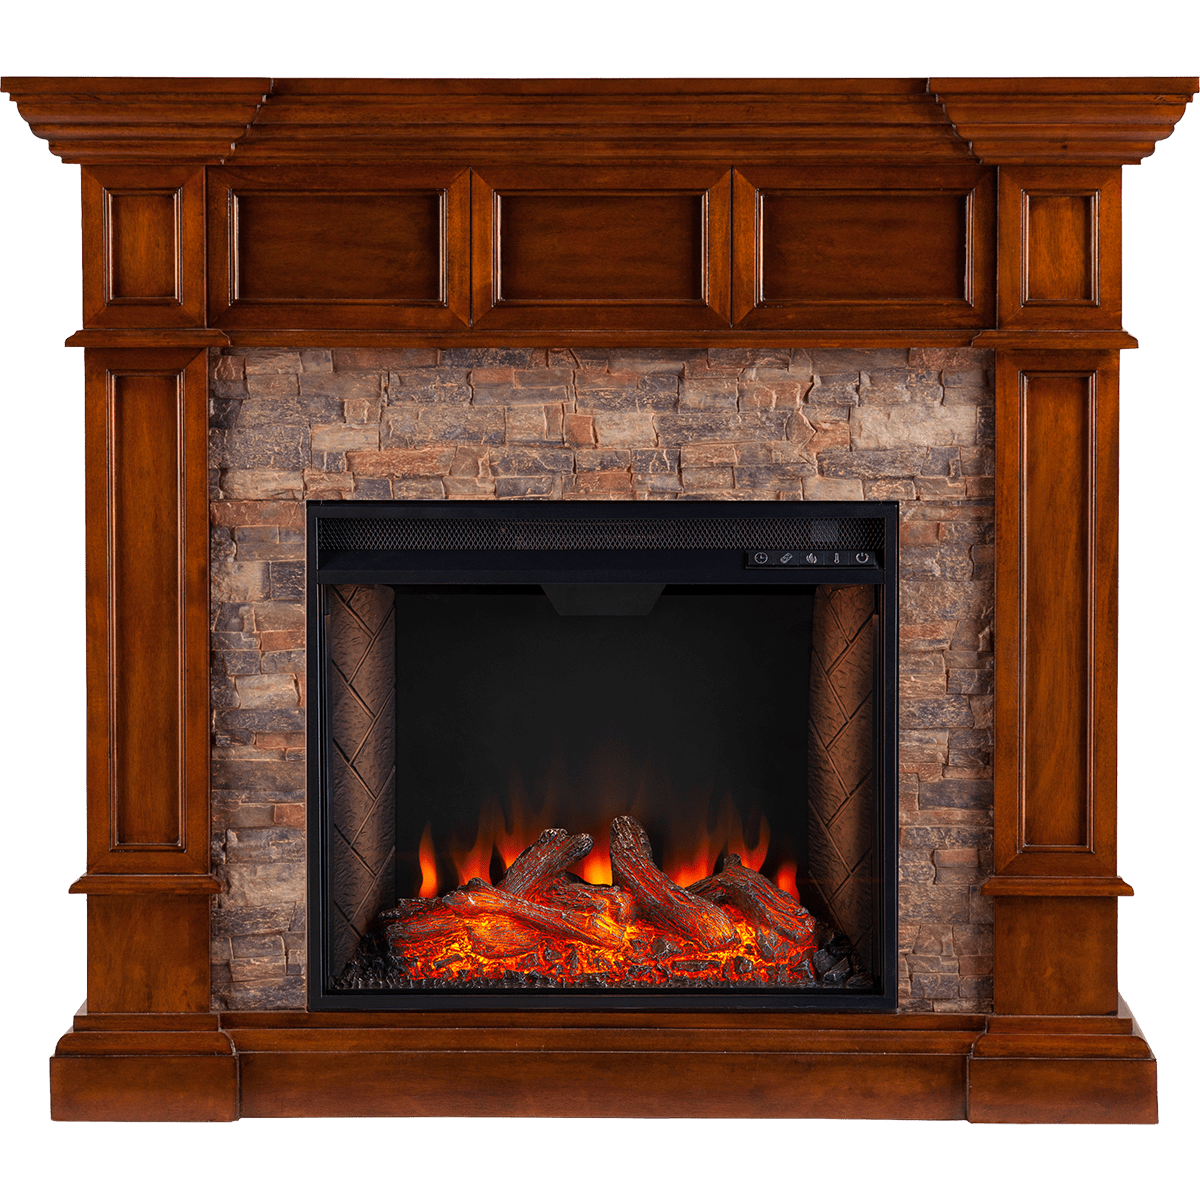 Electric Stone Fireplace with Mantle Elegant southern Enterprises Merrimack Simulated Stone Convertible Electric Fireplace